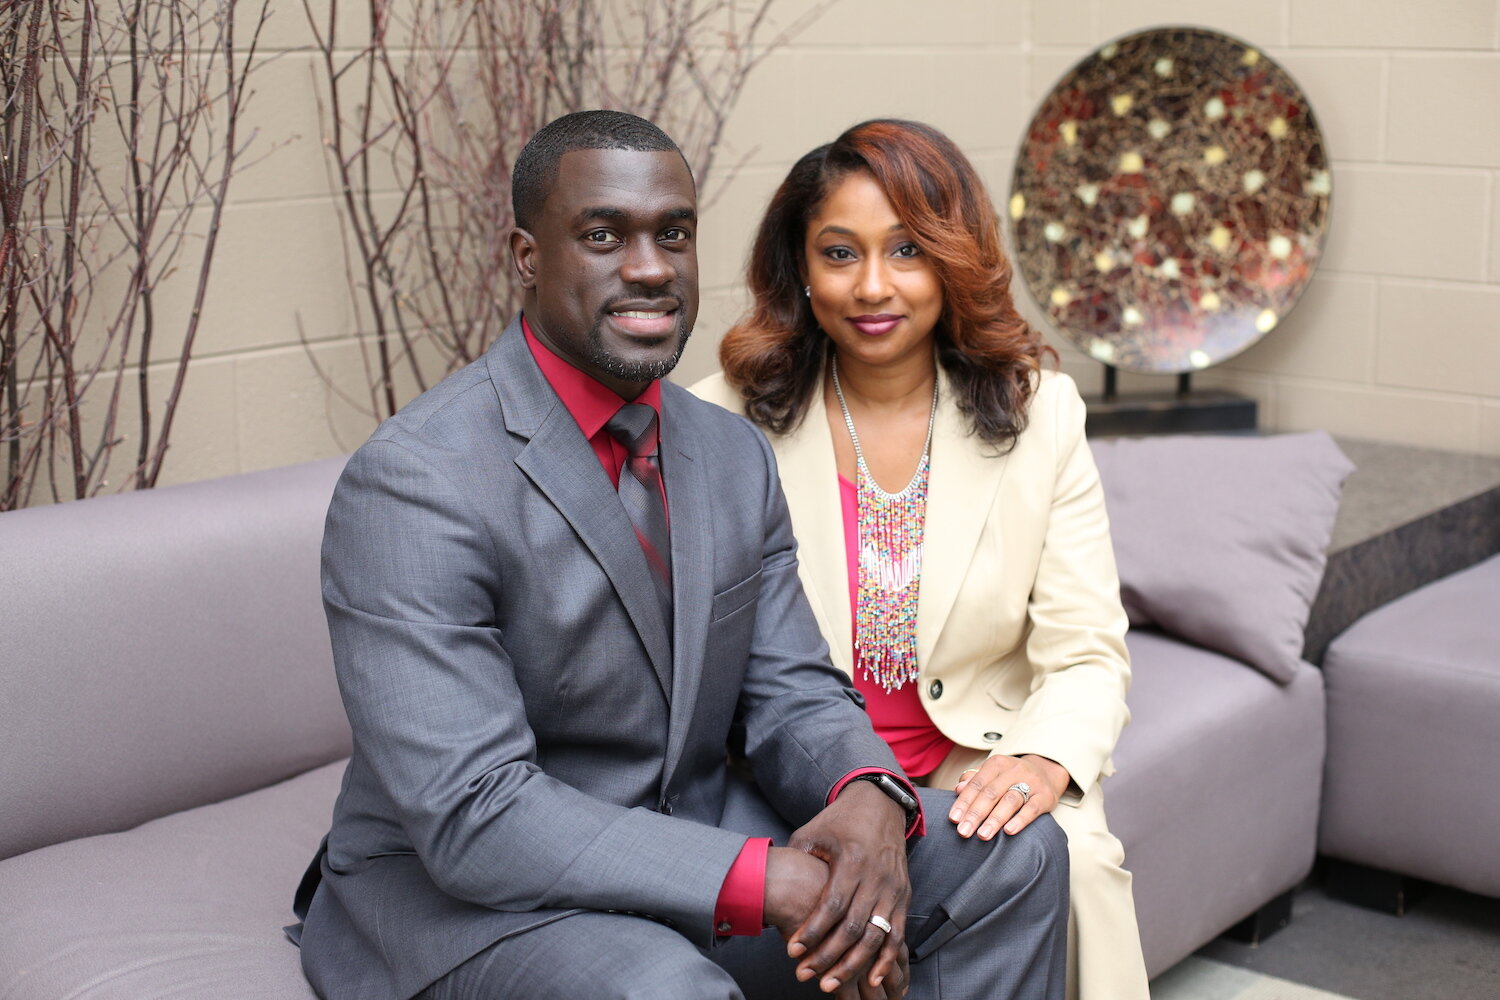 Aaron and Janell Lane are the husband-and-wife team behind Courageous Healing, Inc., and Courageous Living, LLC.